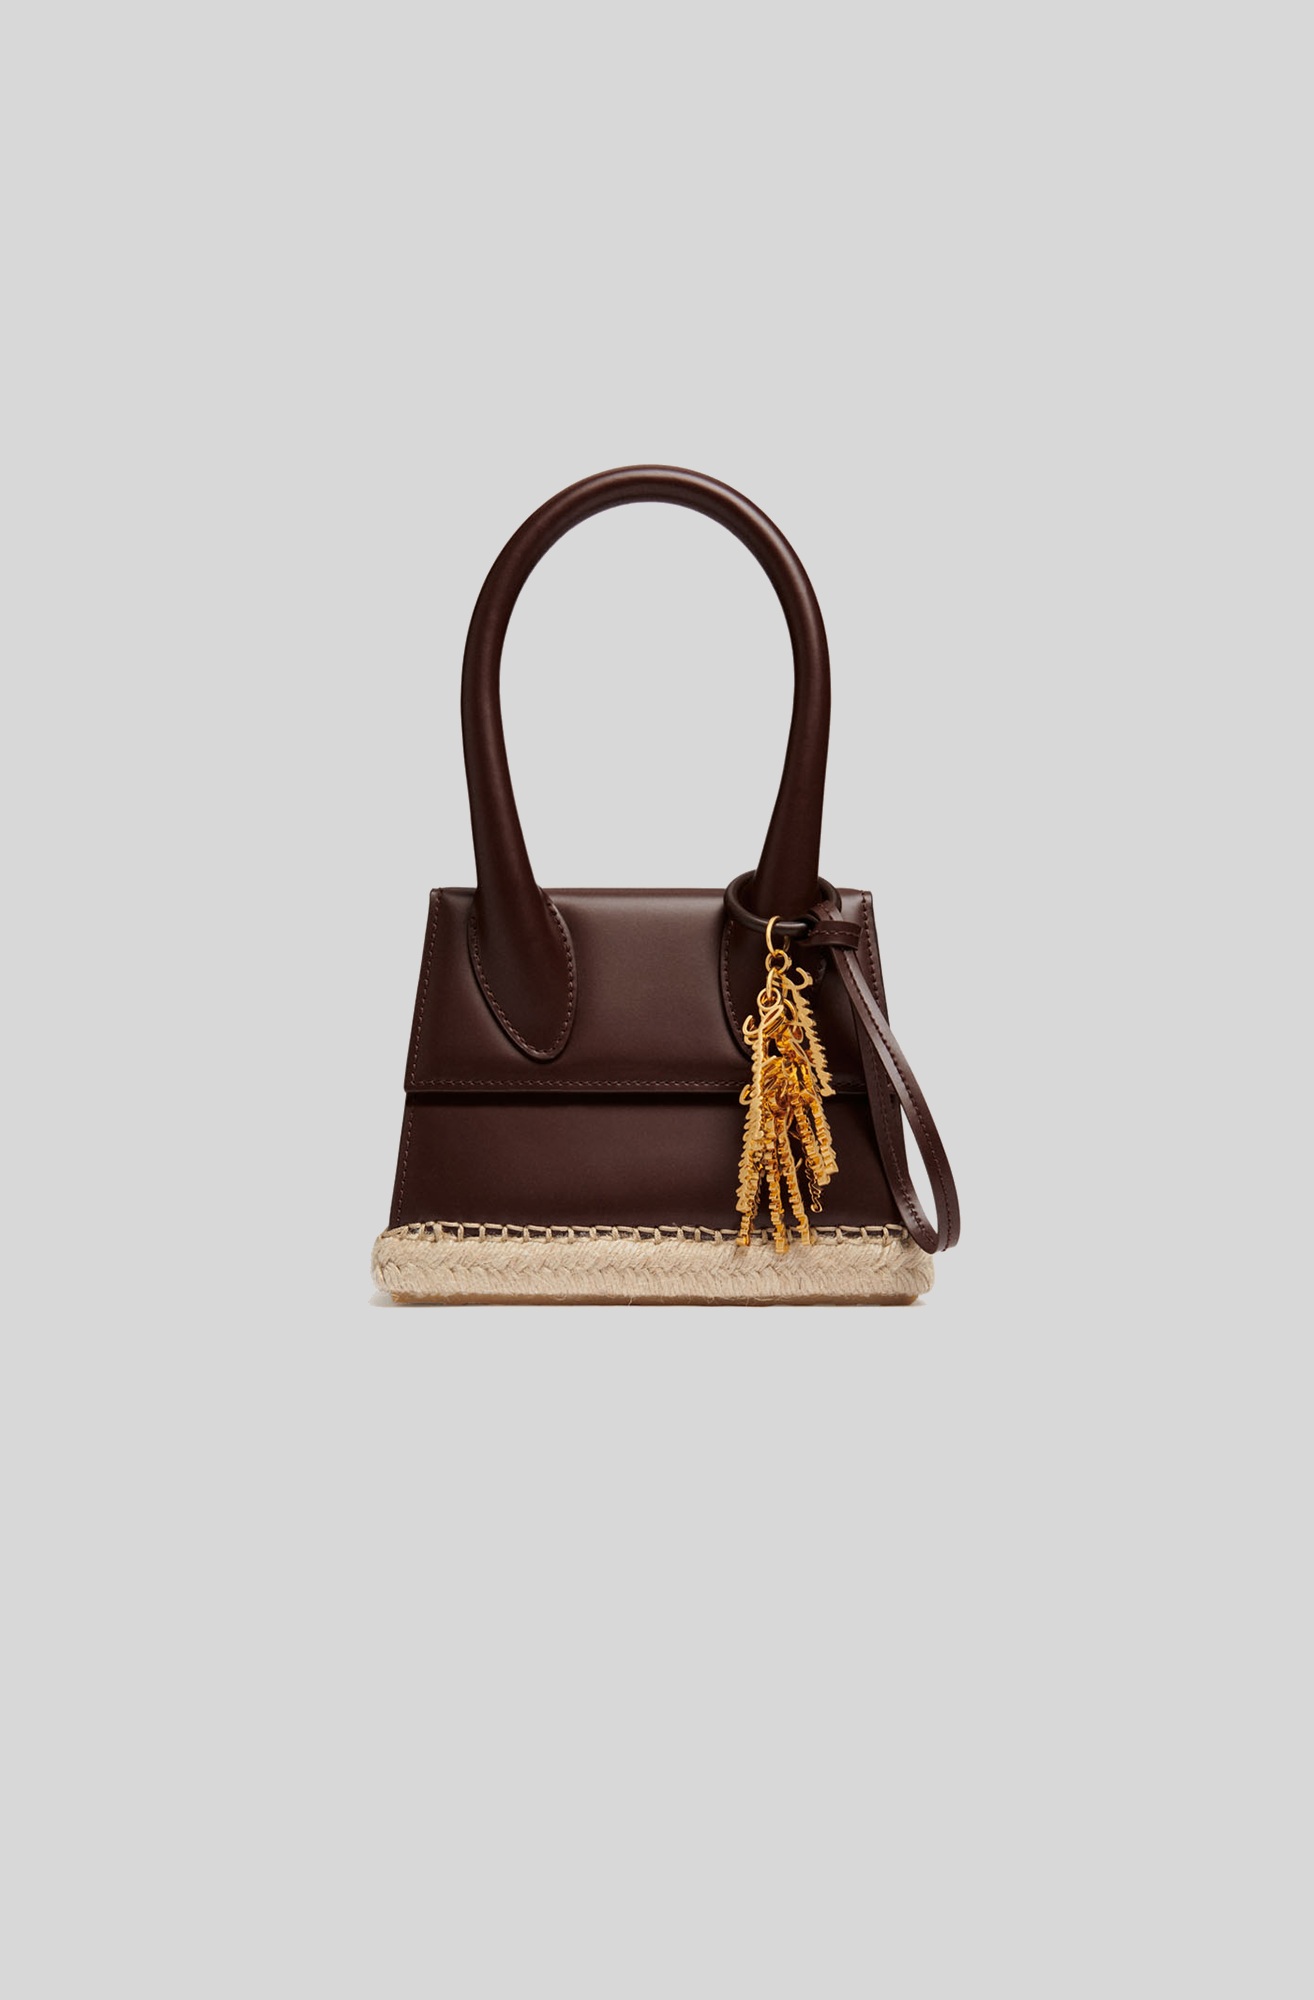 Jacquemus Le Chiquito moyen Cordao leather bag - Brown